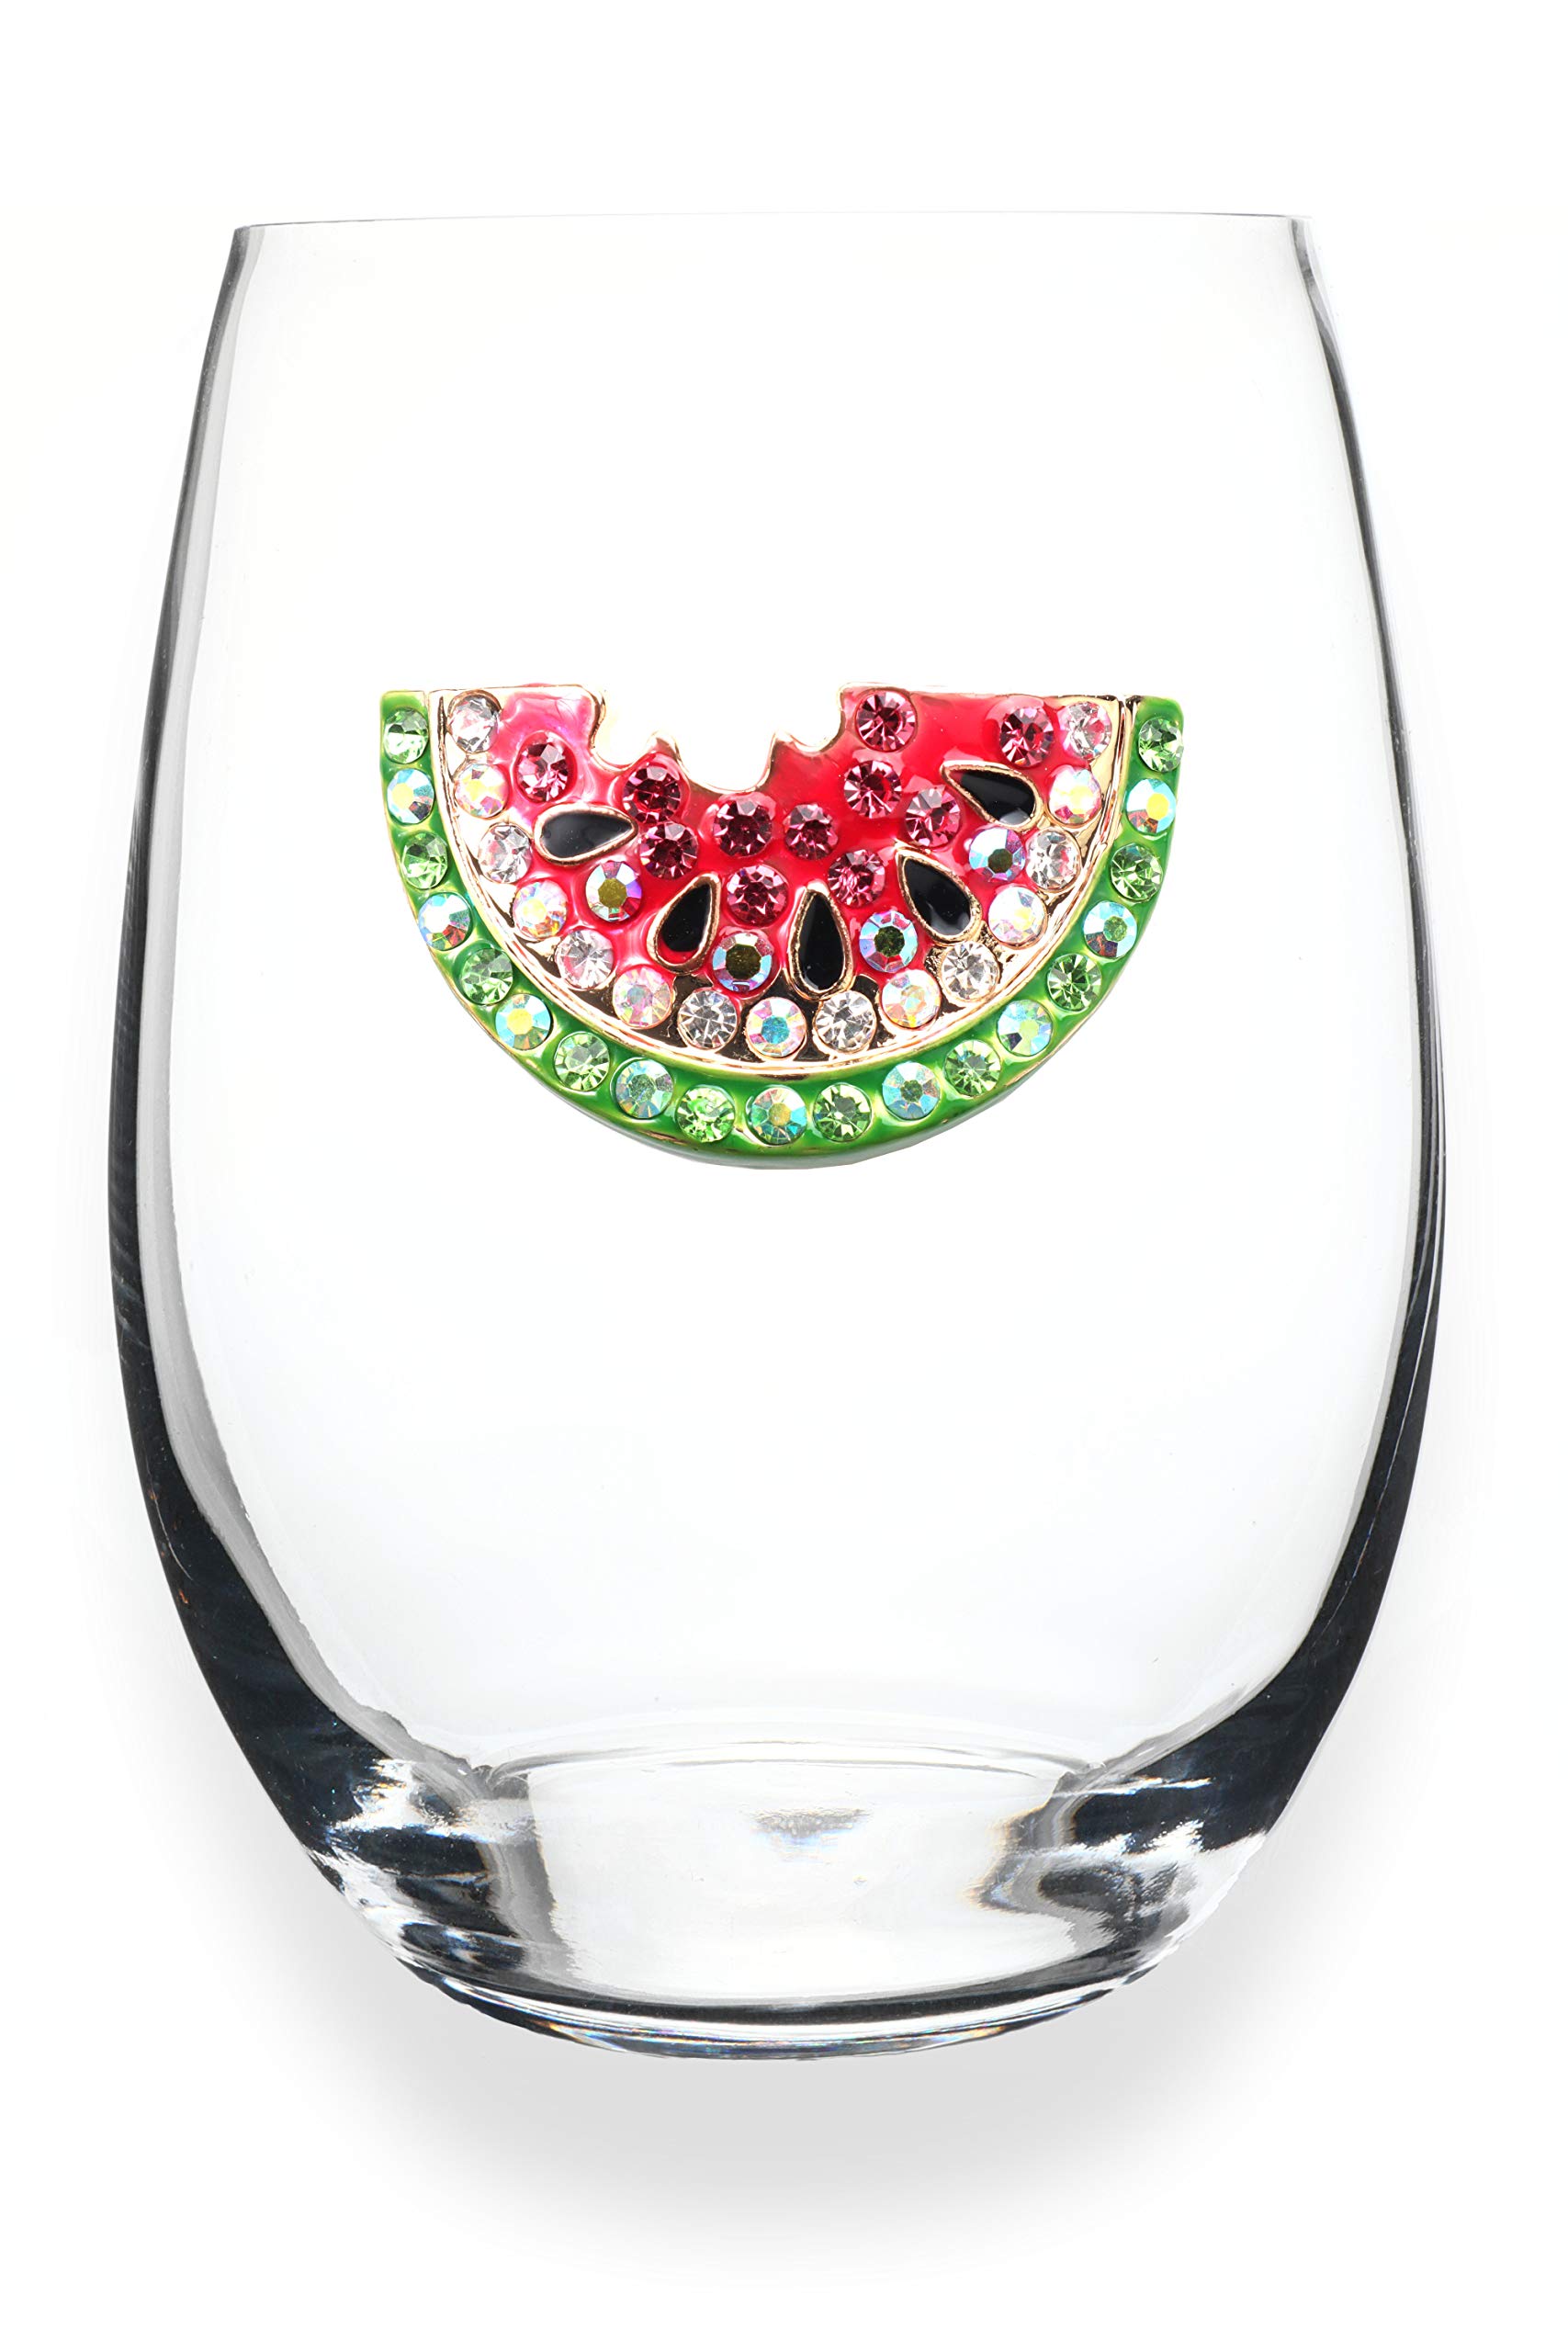 THE QUEENS' JEWELS Watermelon Jeweled Stemless Wine Glass, 21 oz. - Unique Gift for Women, Birthday, Cute, Fun, Not Painted, Decorated, Bling, Bedazzled, Rhinestone